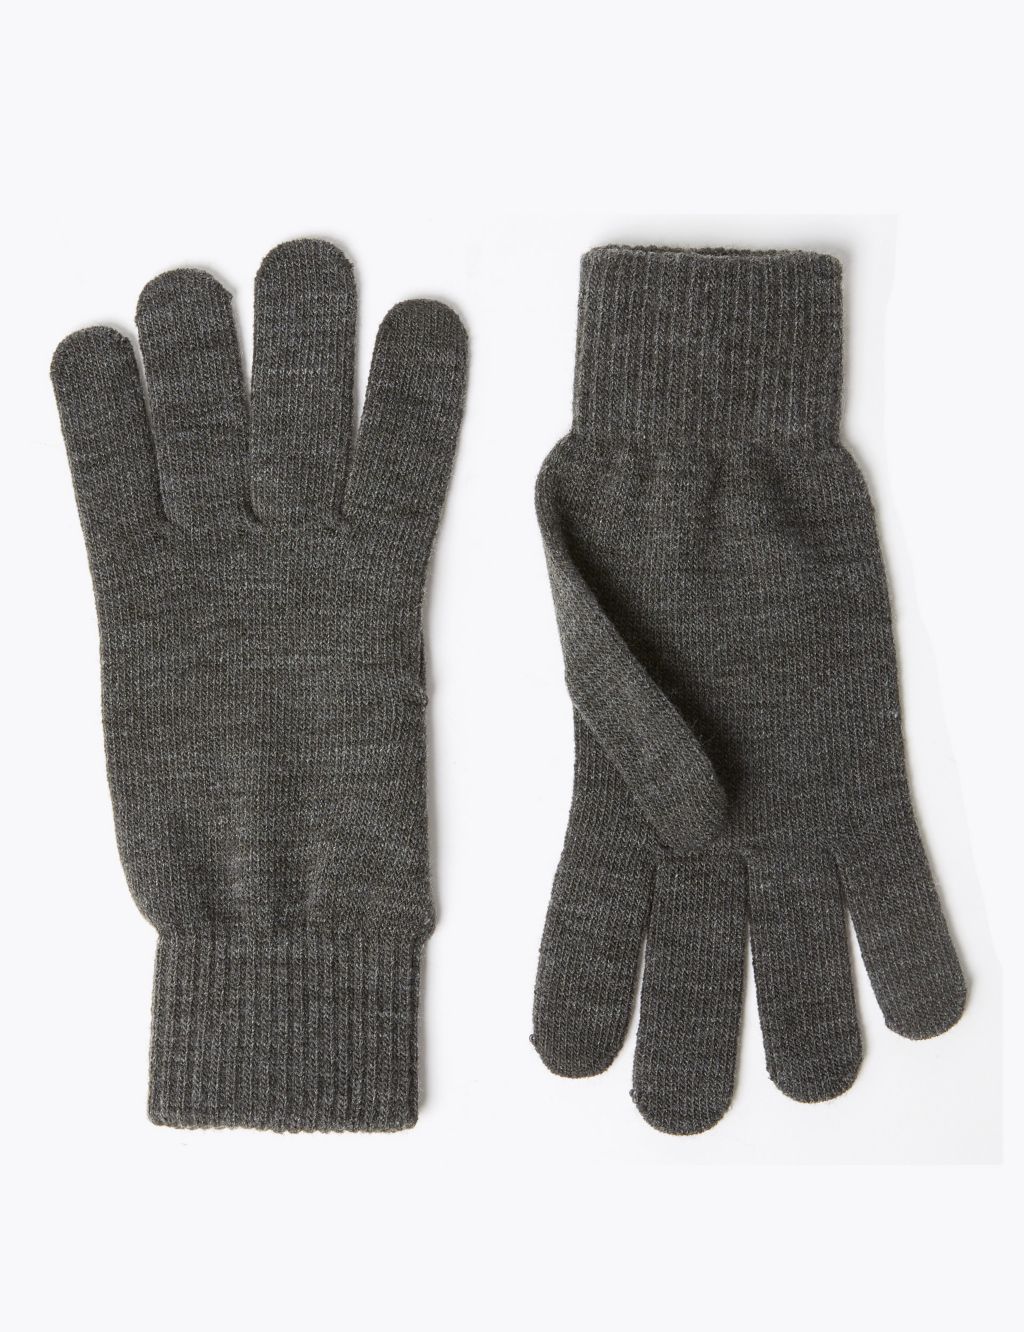 Knitted Gloves image 1